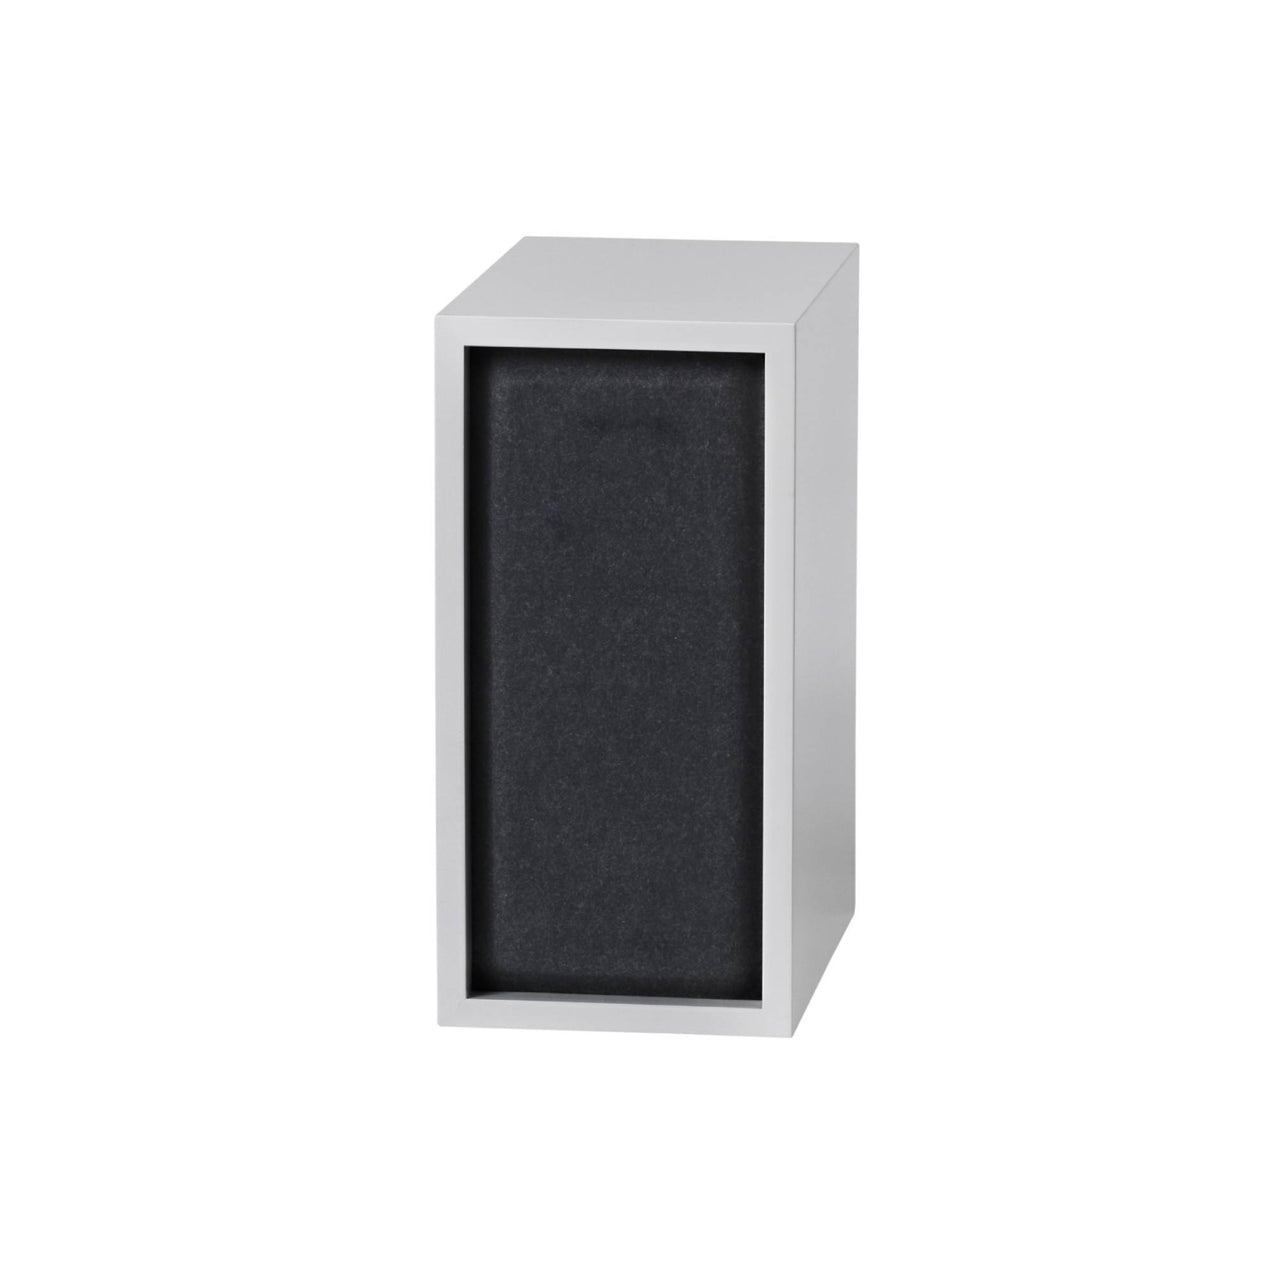 Stacked Acoustic Panels: Small - 7.1